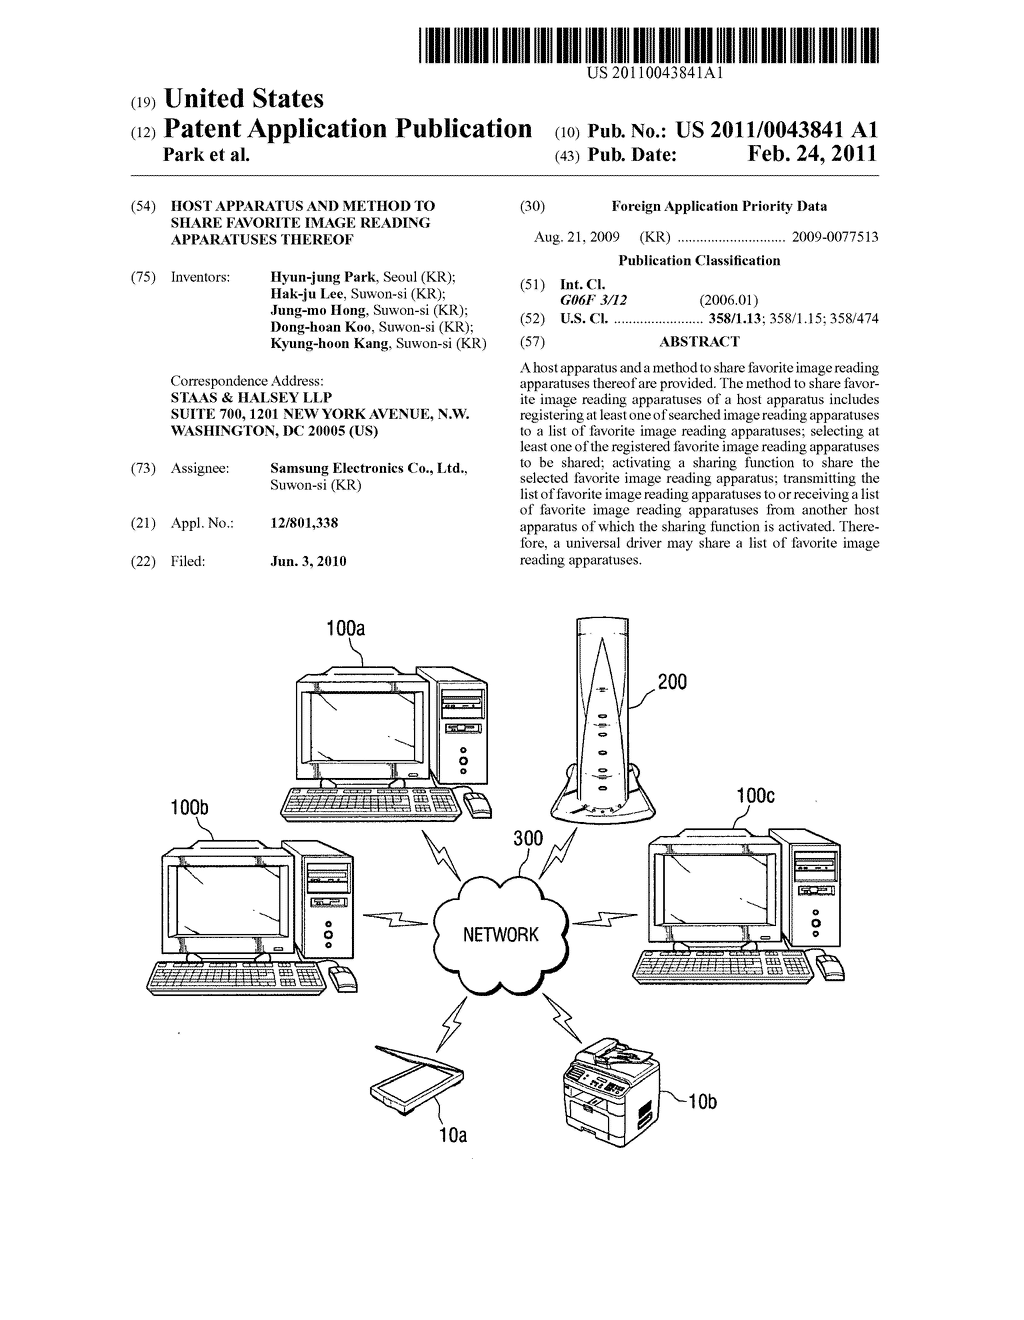 Host apparatus and method to share favorite image reading apparatuses thereof - diagram, schematic, and image 01